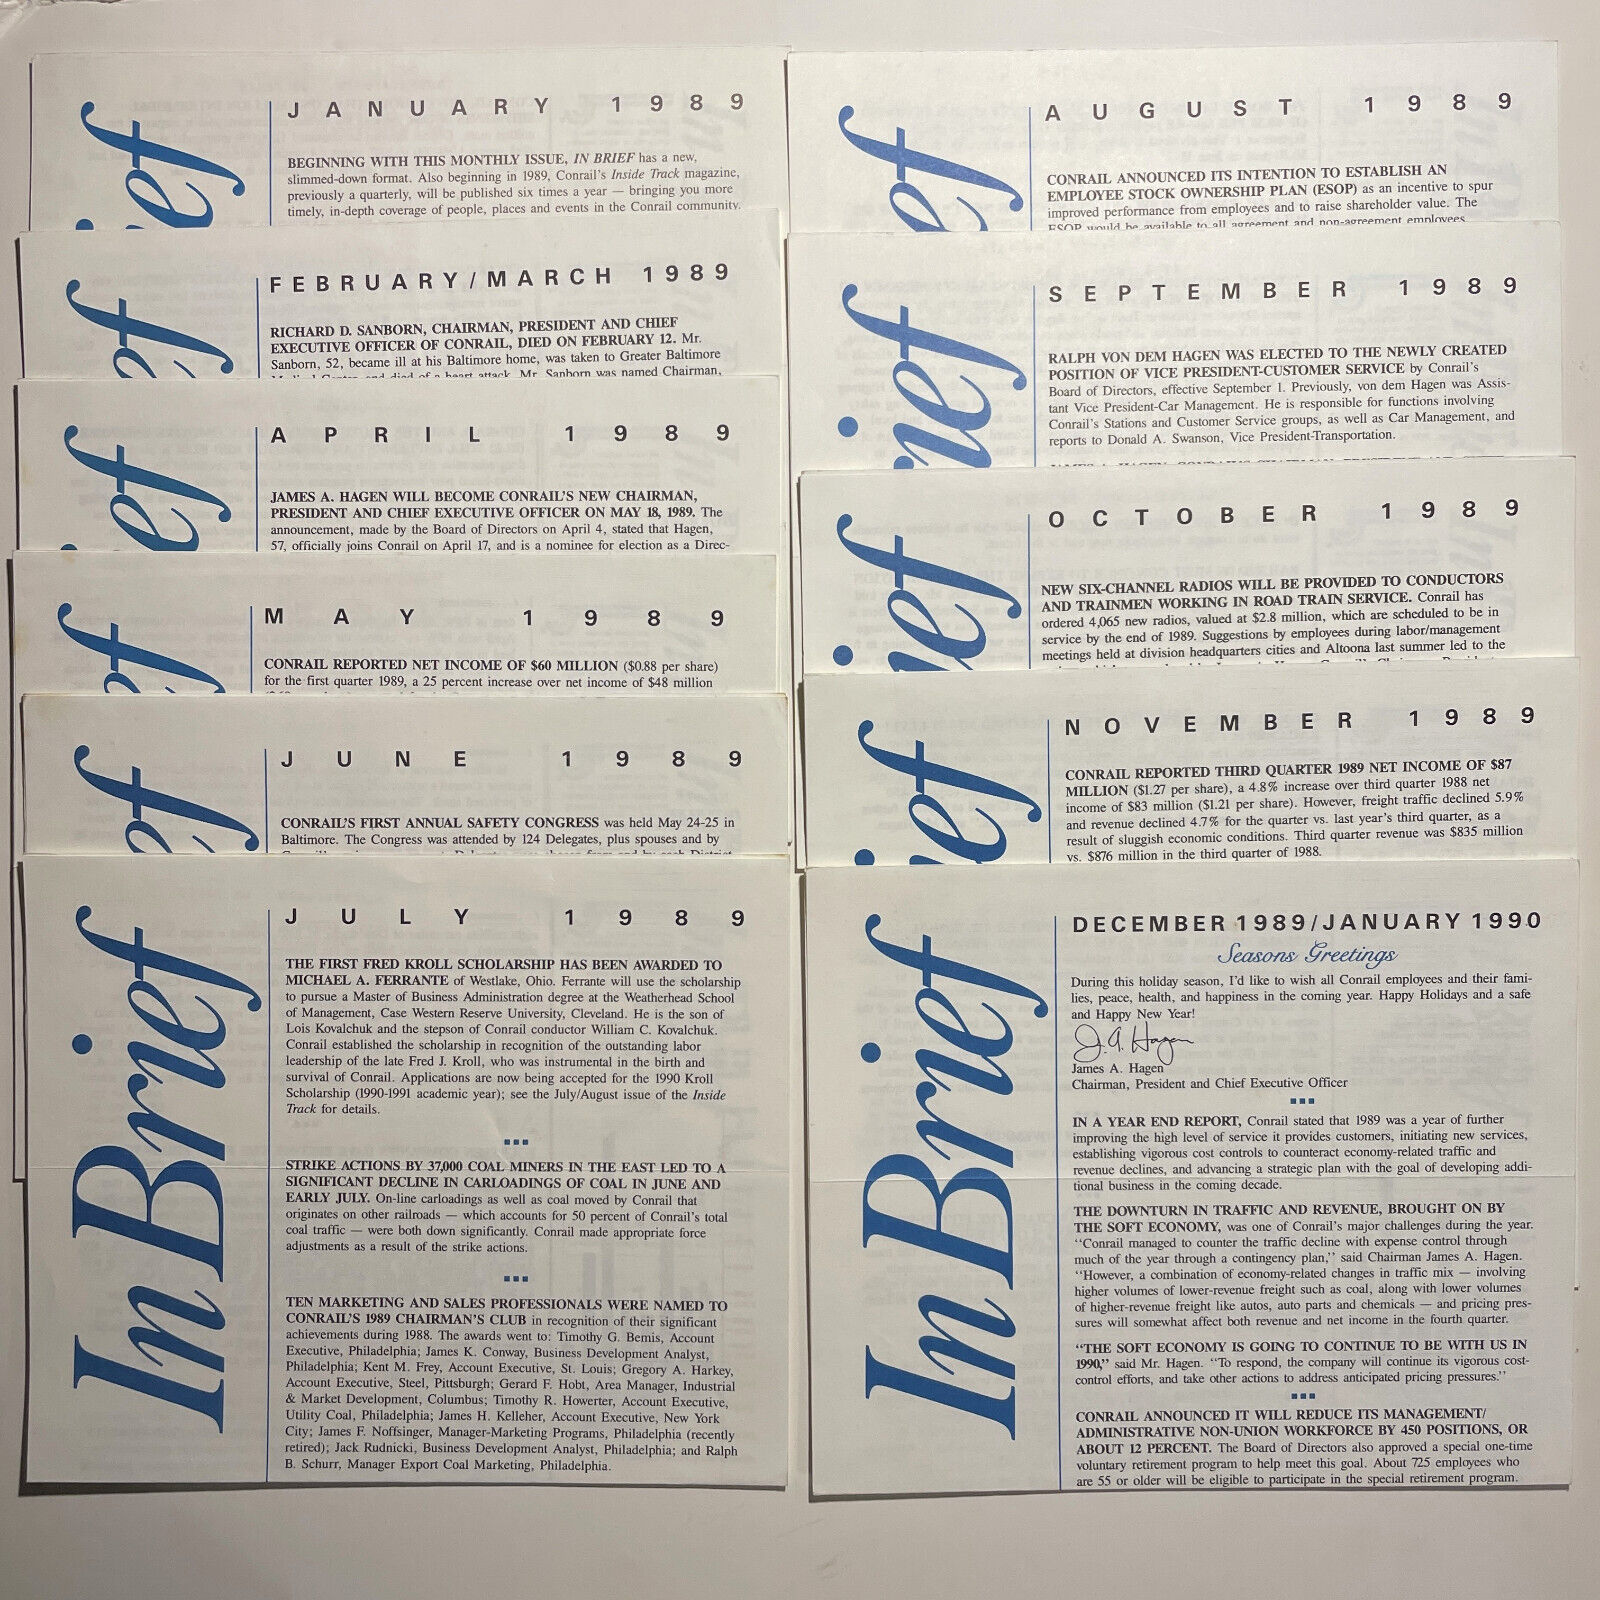 CR Conrail In Brief, 15 employee newsletters, 1989-1991